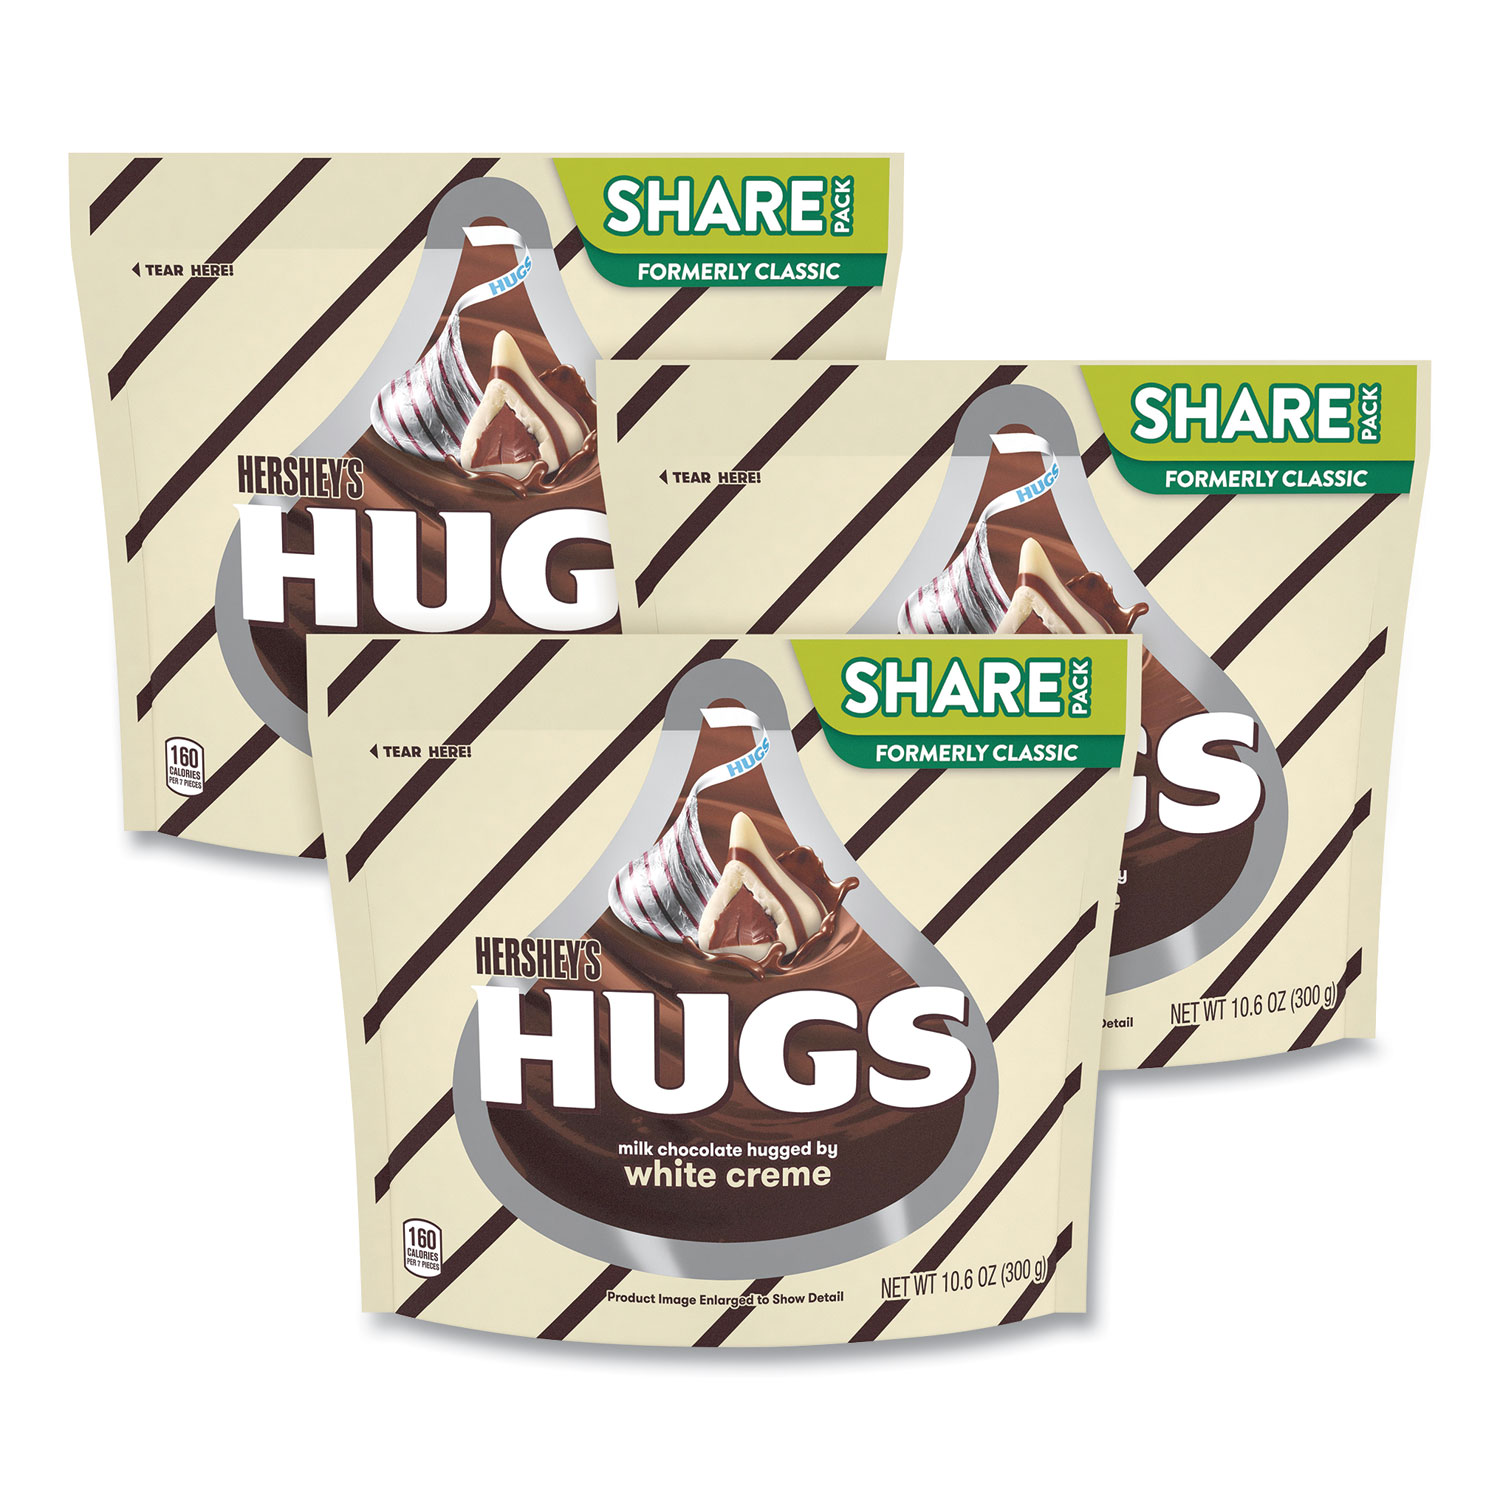  Hershey's 11032 HUGS Candy, Milk Chocolate with White Creme, 1.6 oz Bag, 3 Bags/Pack, Free Delivery in 1-4 Business Days (GRR24600404) 